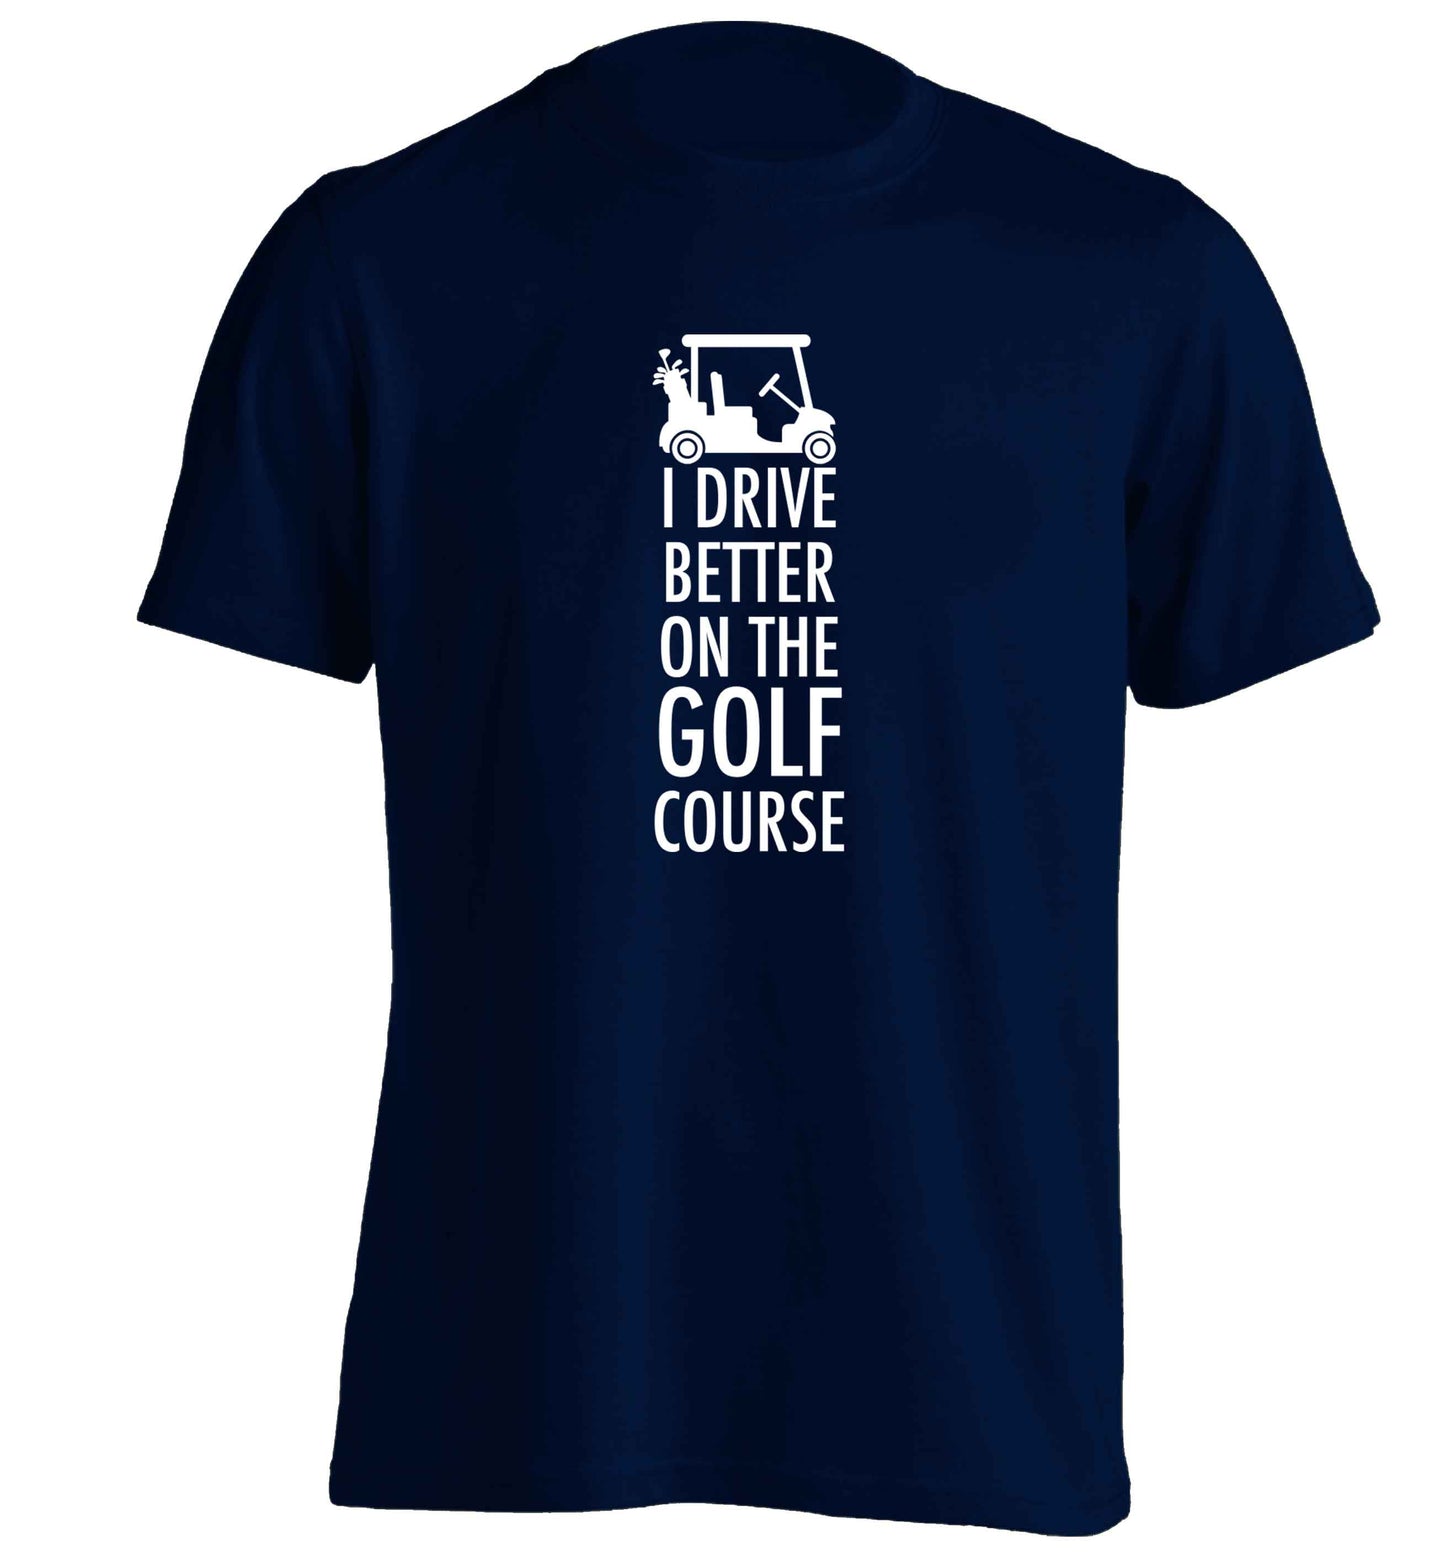 I drive better on the golf course adults unisex navy Tshirt 2XL